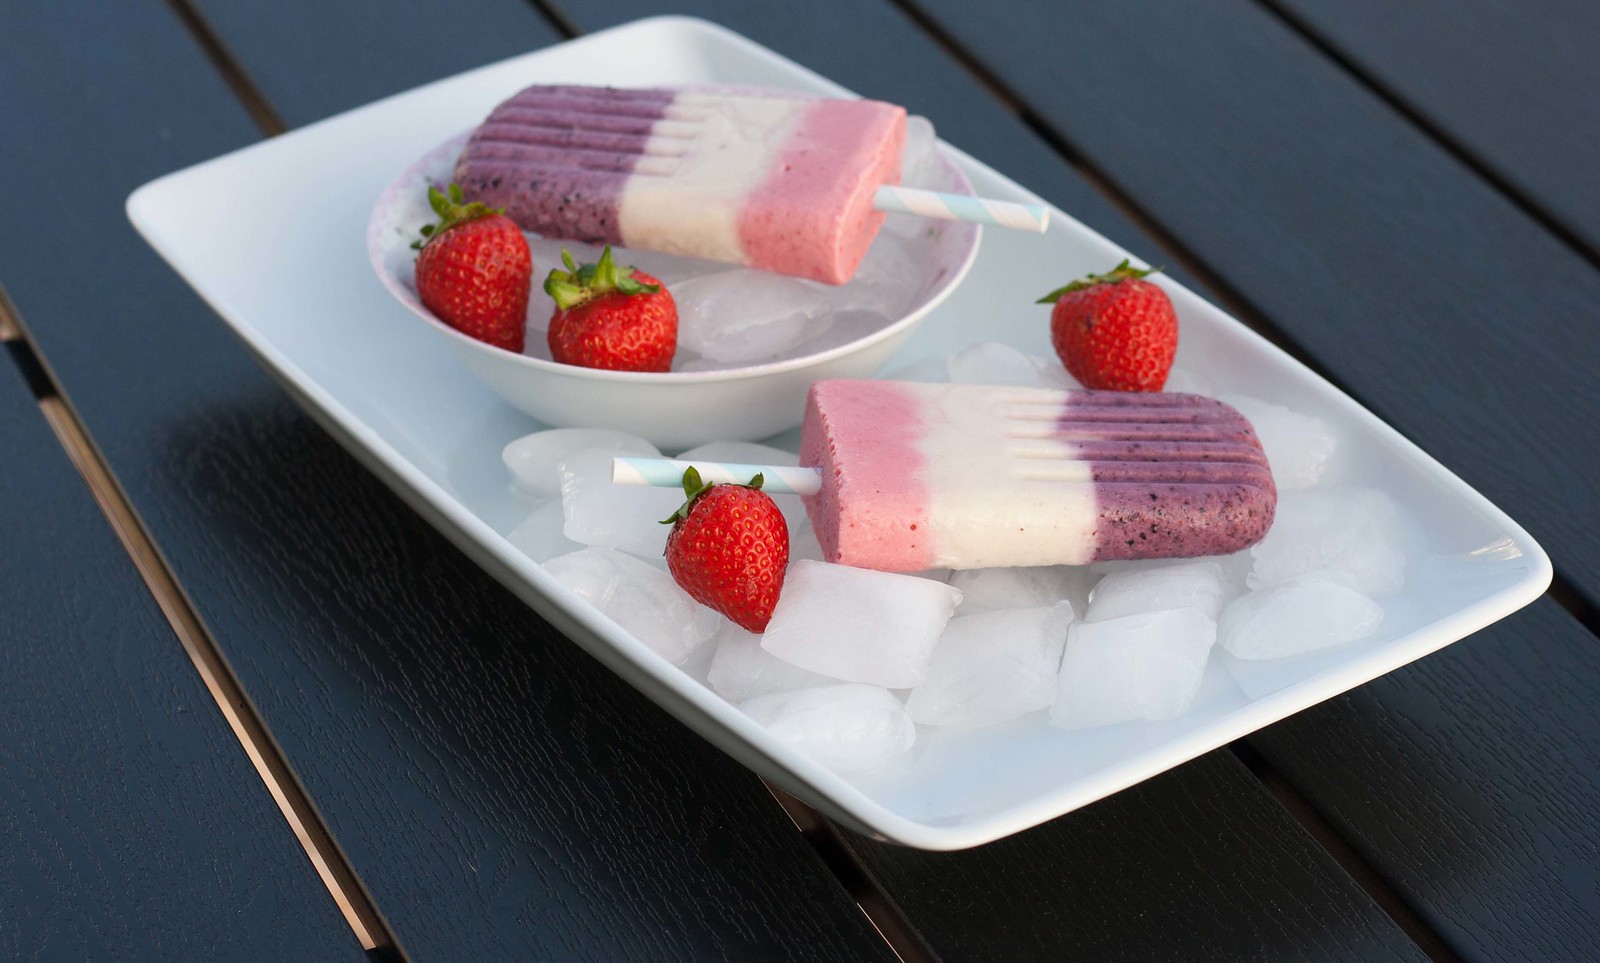 Recipe for Homemade Popsicle with Greek Yogurt and Berries